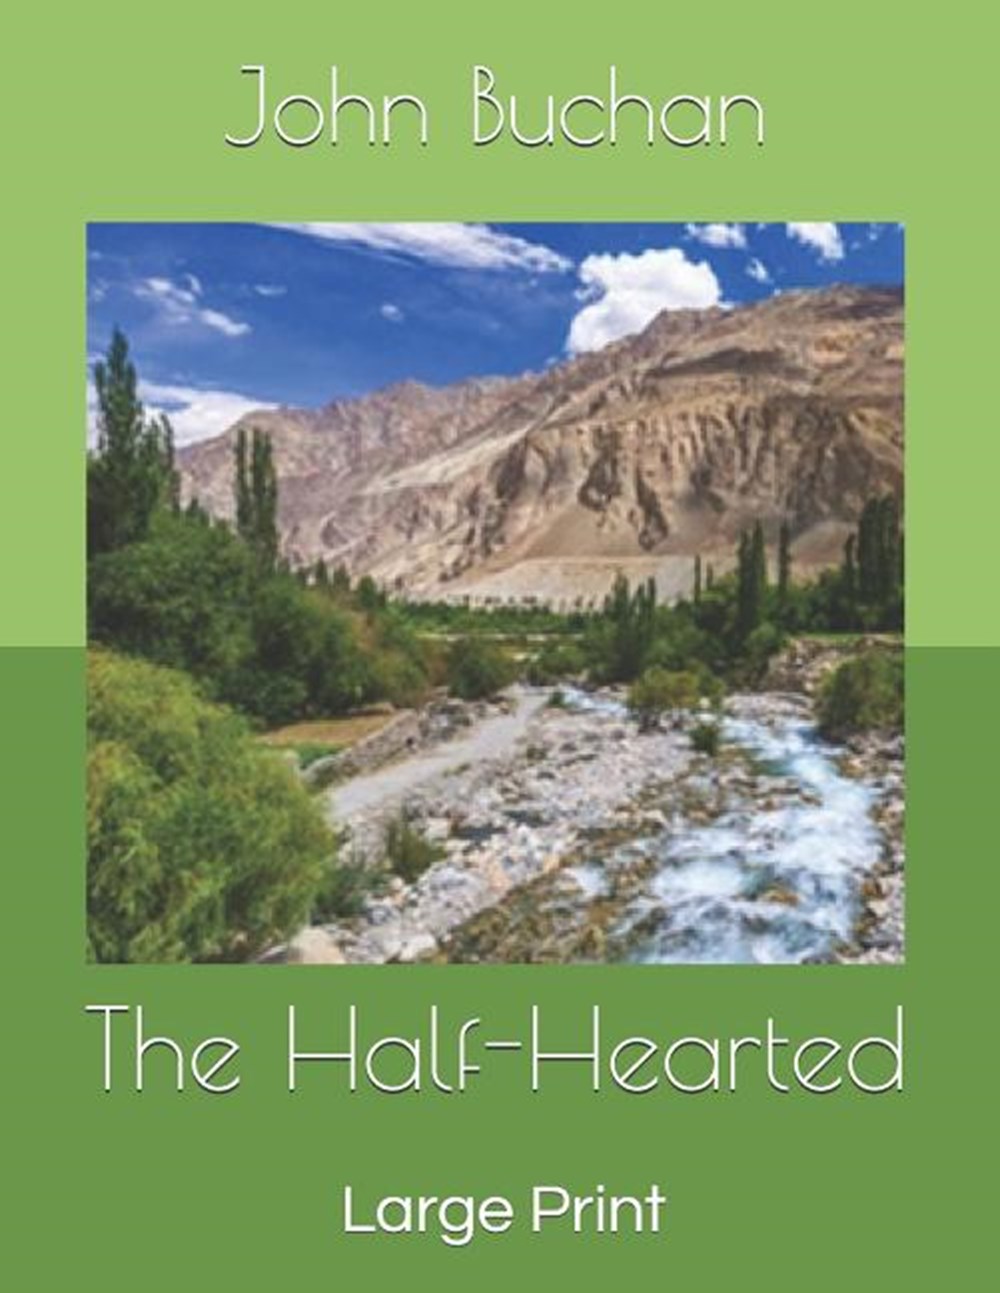 Half-Hearted: Large Print